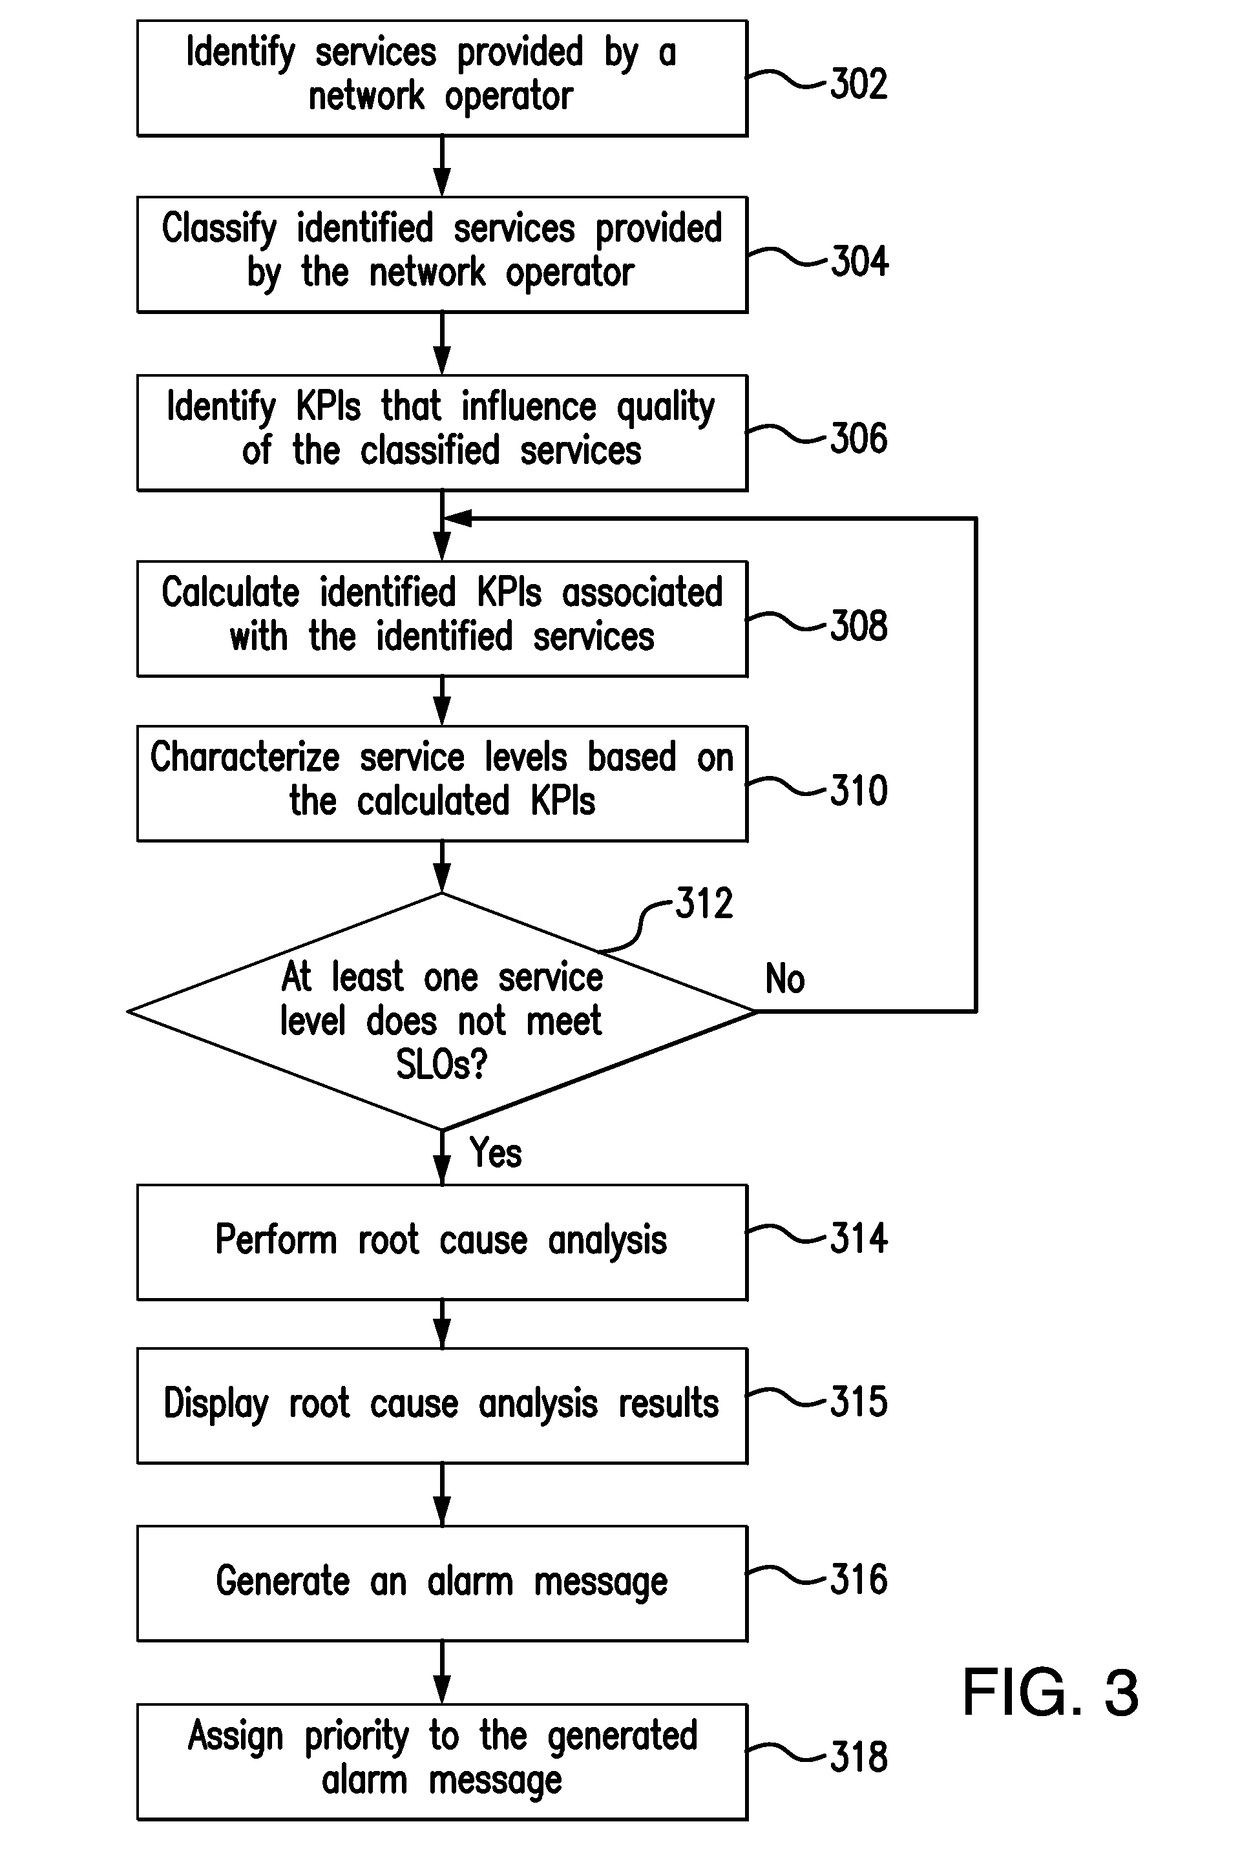 System and method for automatically identifying failure in services deployed by mobile network operators